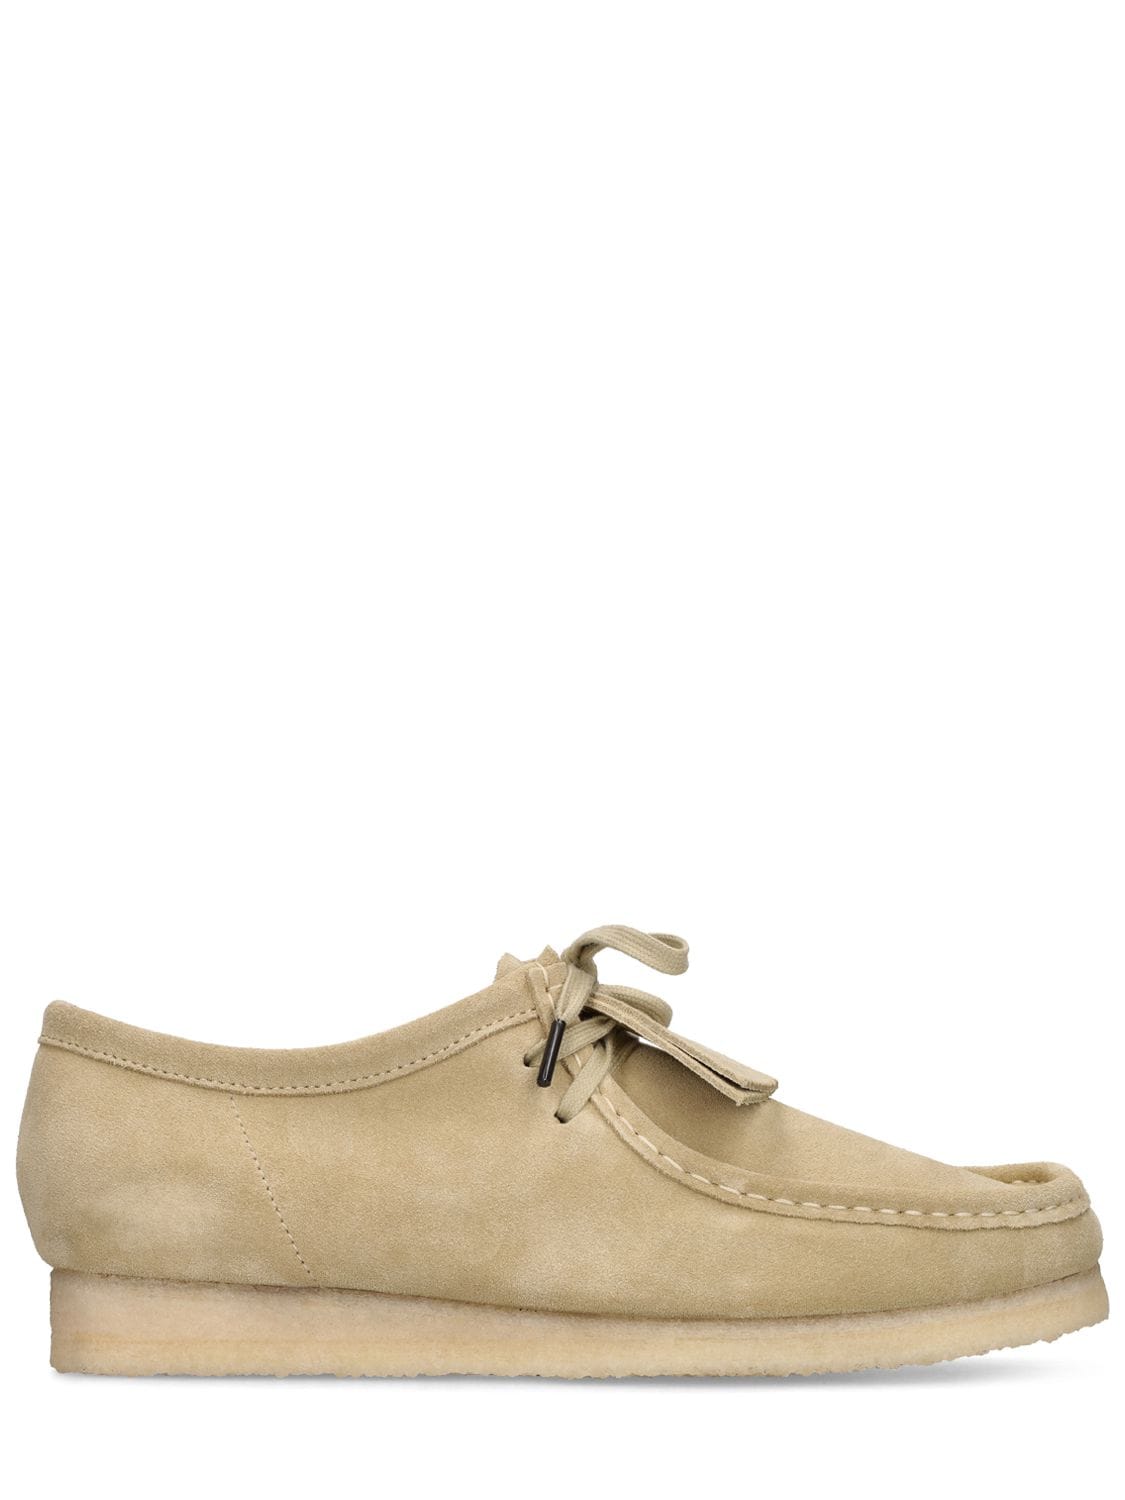 Mm Wallabee Leather Lace-up Shoes - CLARKS ORIGINALS - Modalova